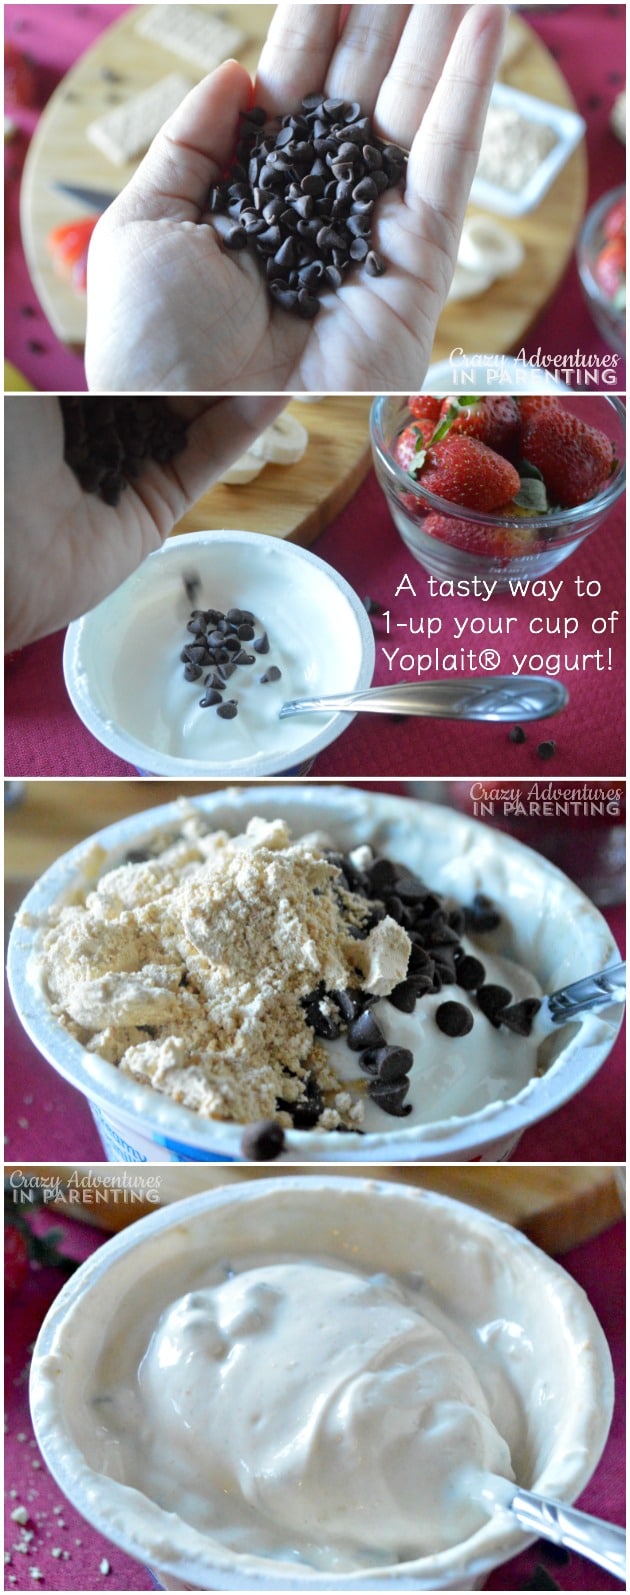 A tasty way to 1-up your cup of Yoplait yogurt